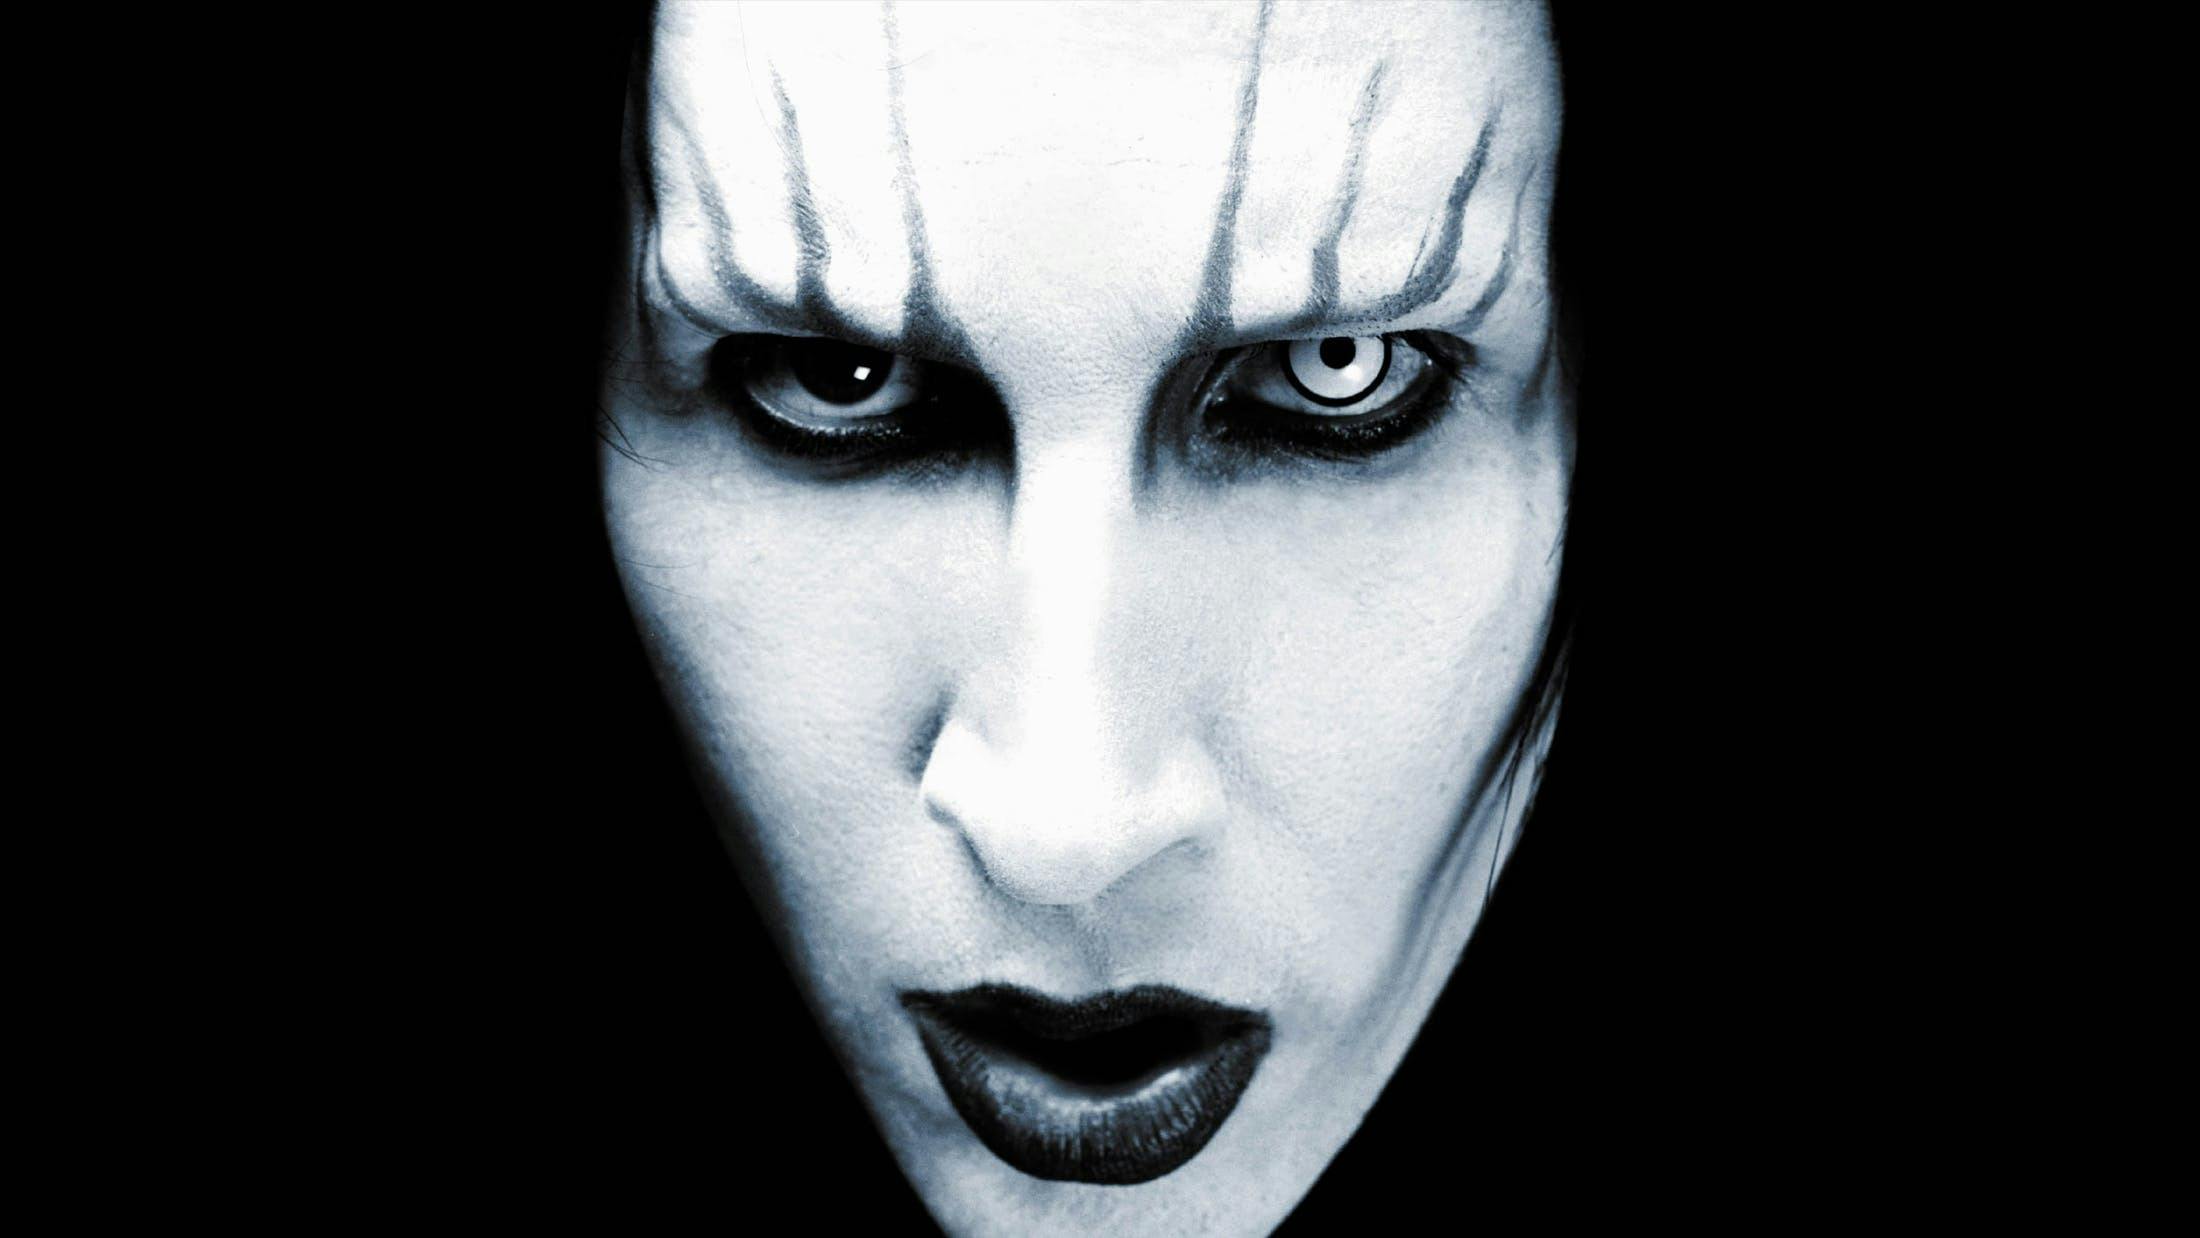 The 20 Greatest Marilyn Manson Songs – Ranked